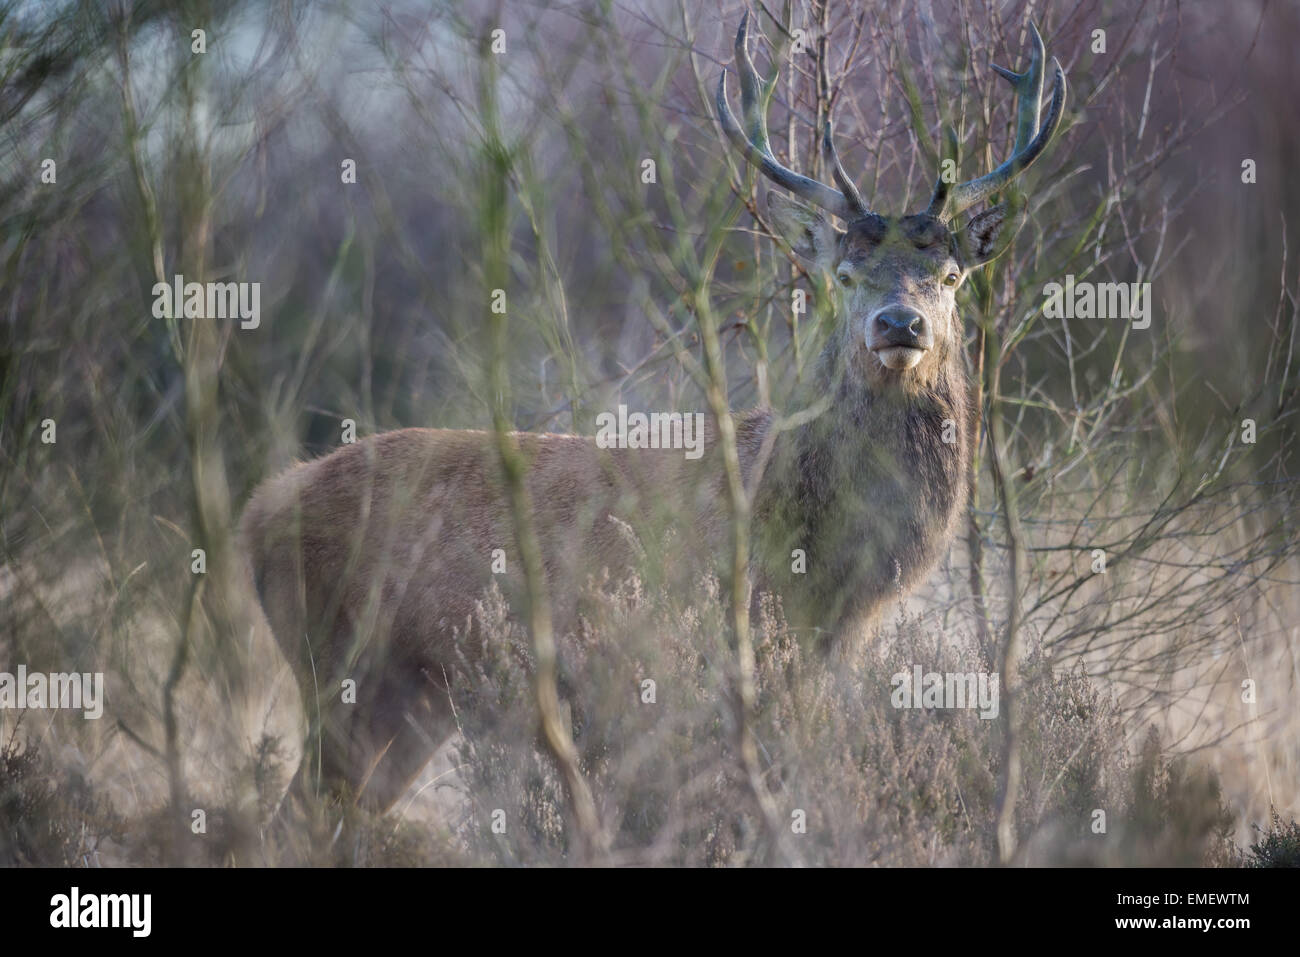 Red deer living amongst an urban environment in Staffordshire. Stock Photo